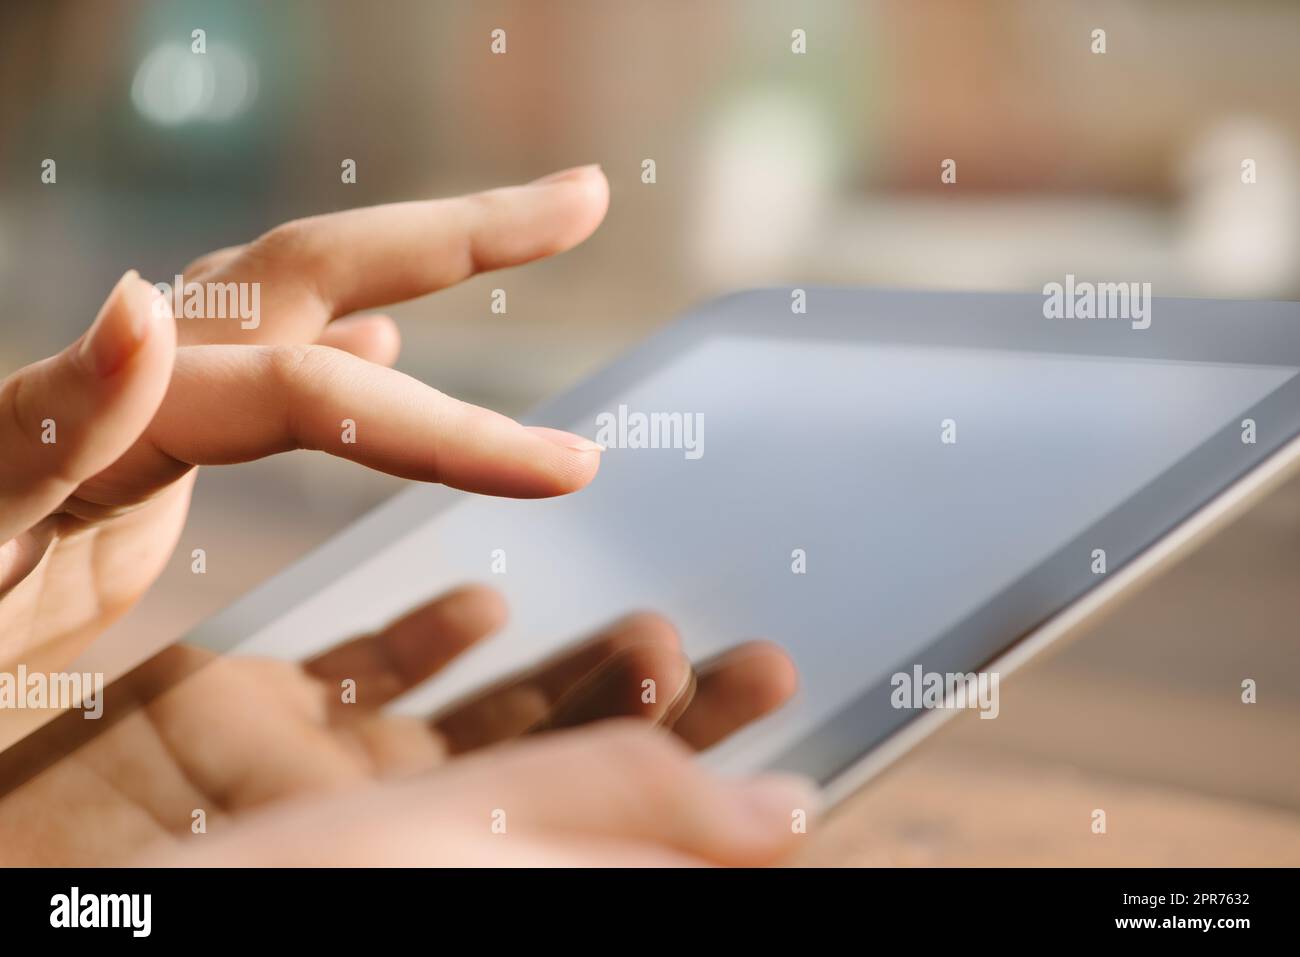 The work never stops. Shot of a woman teleworking in a cafe using a digital tablet. Stock Photo